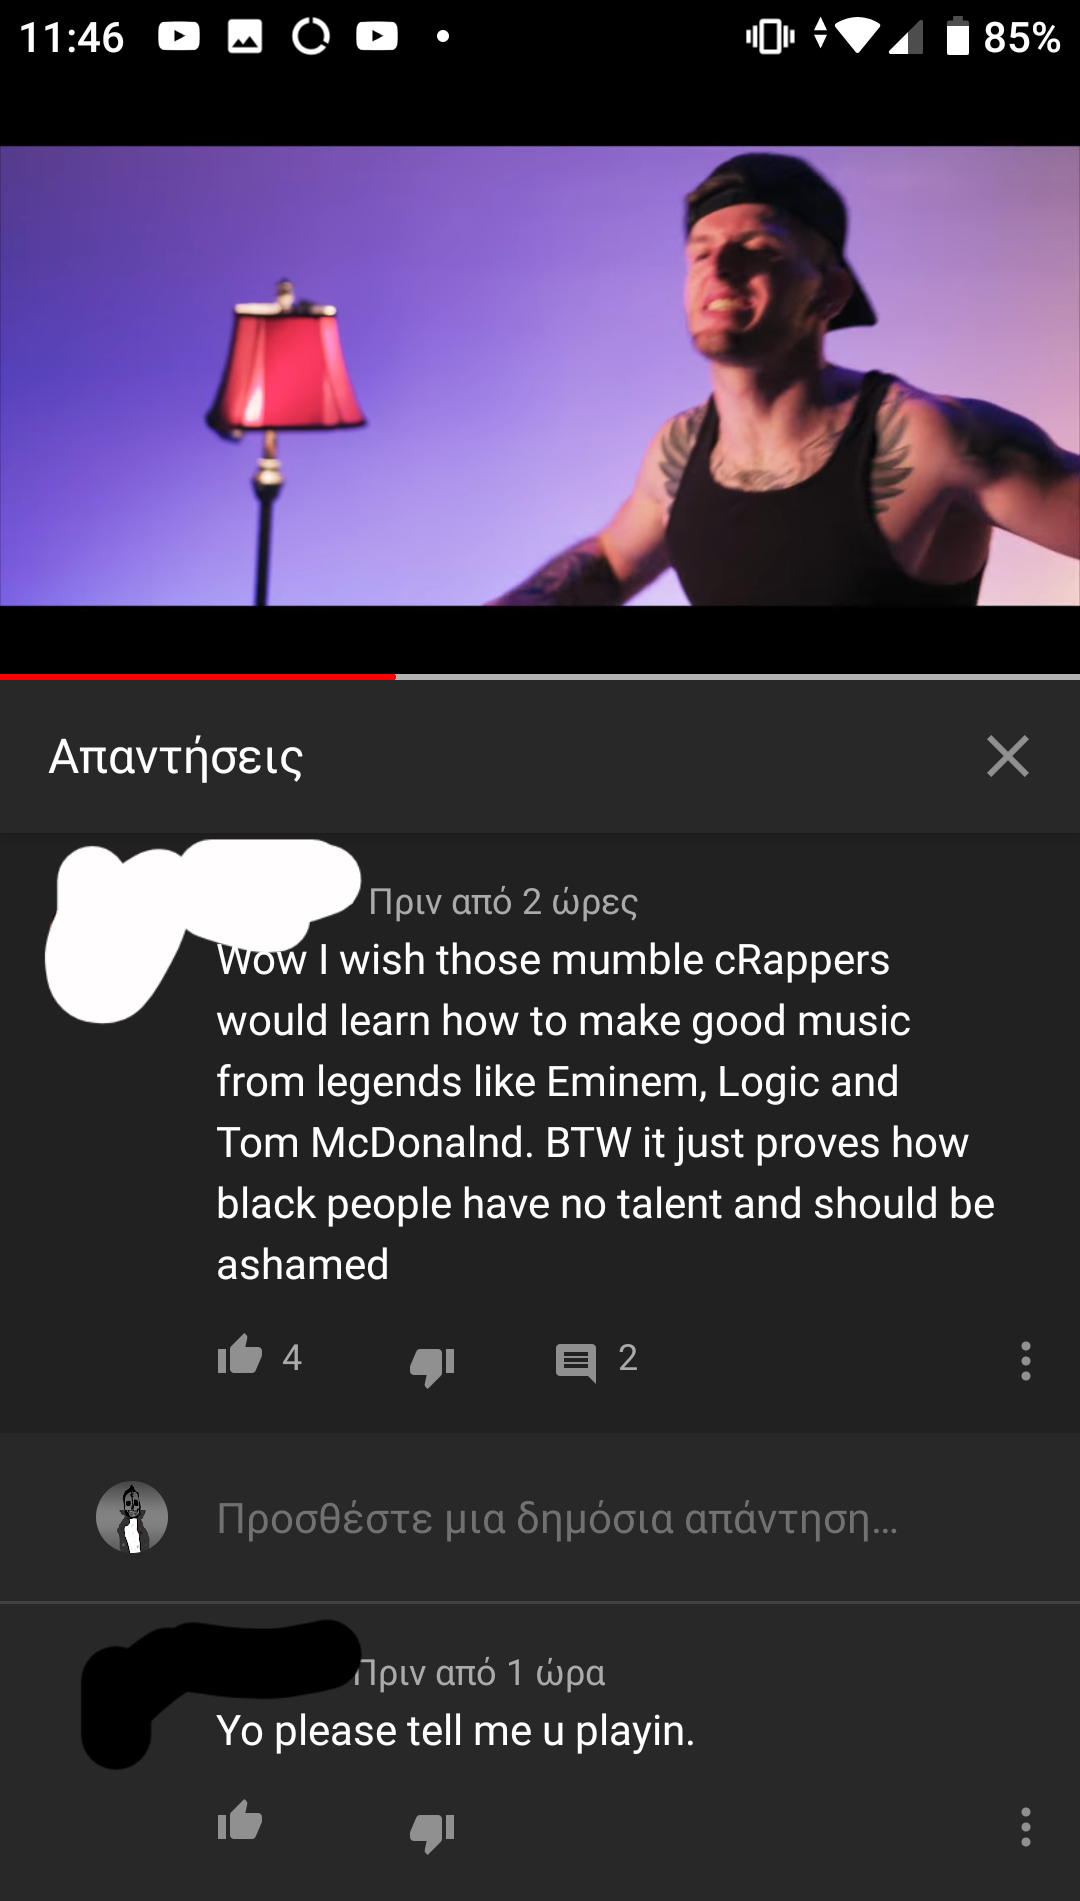 screenshot - . 4 1 85% 2 Wow I wish those mumble Rappers would learn how to make good music from legends Eminem, Logic and Tom McDonalnd. Btw it just proves how black people have no talent and should be ashamed 1 4 4 2 . 1 Yo please tell me u playin